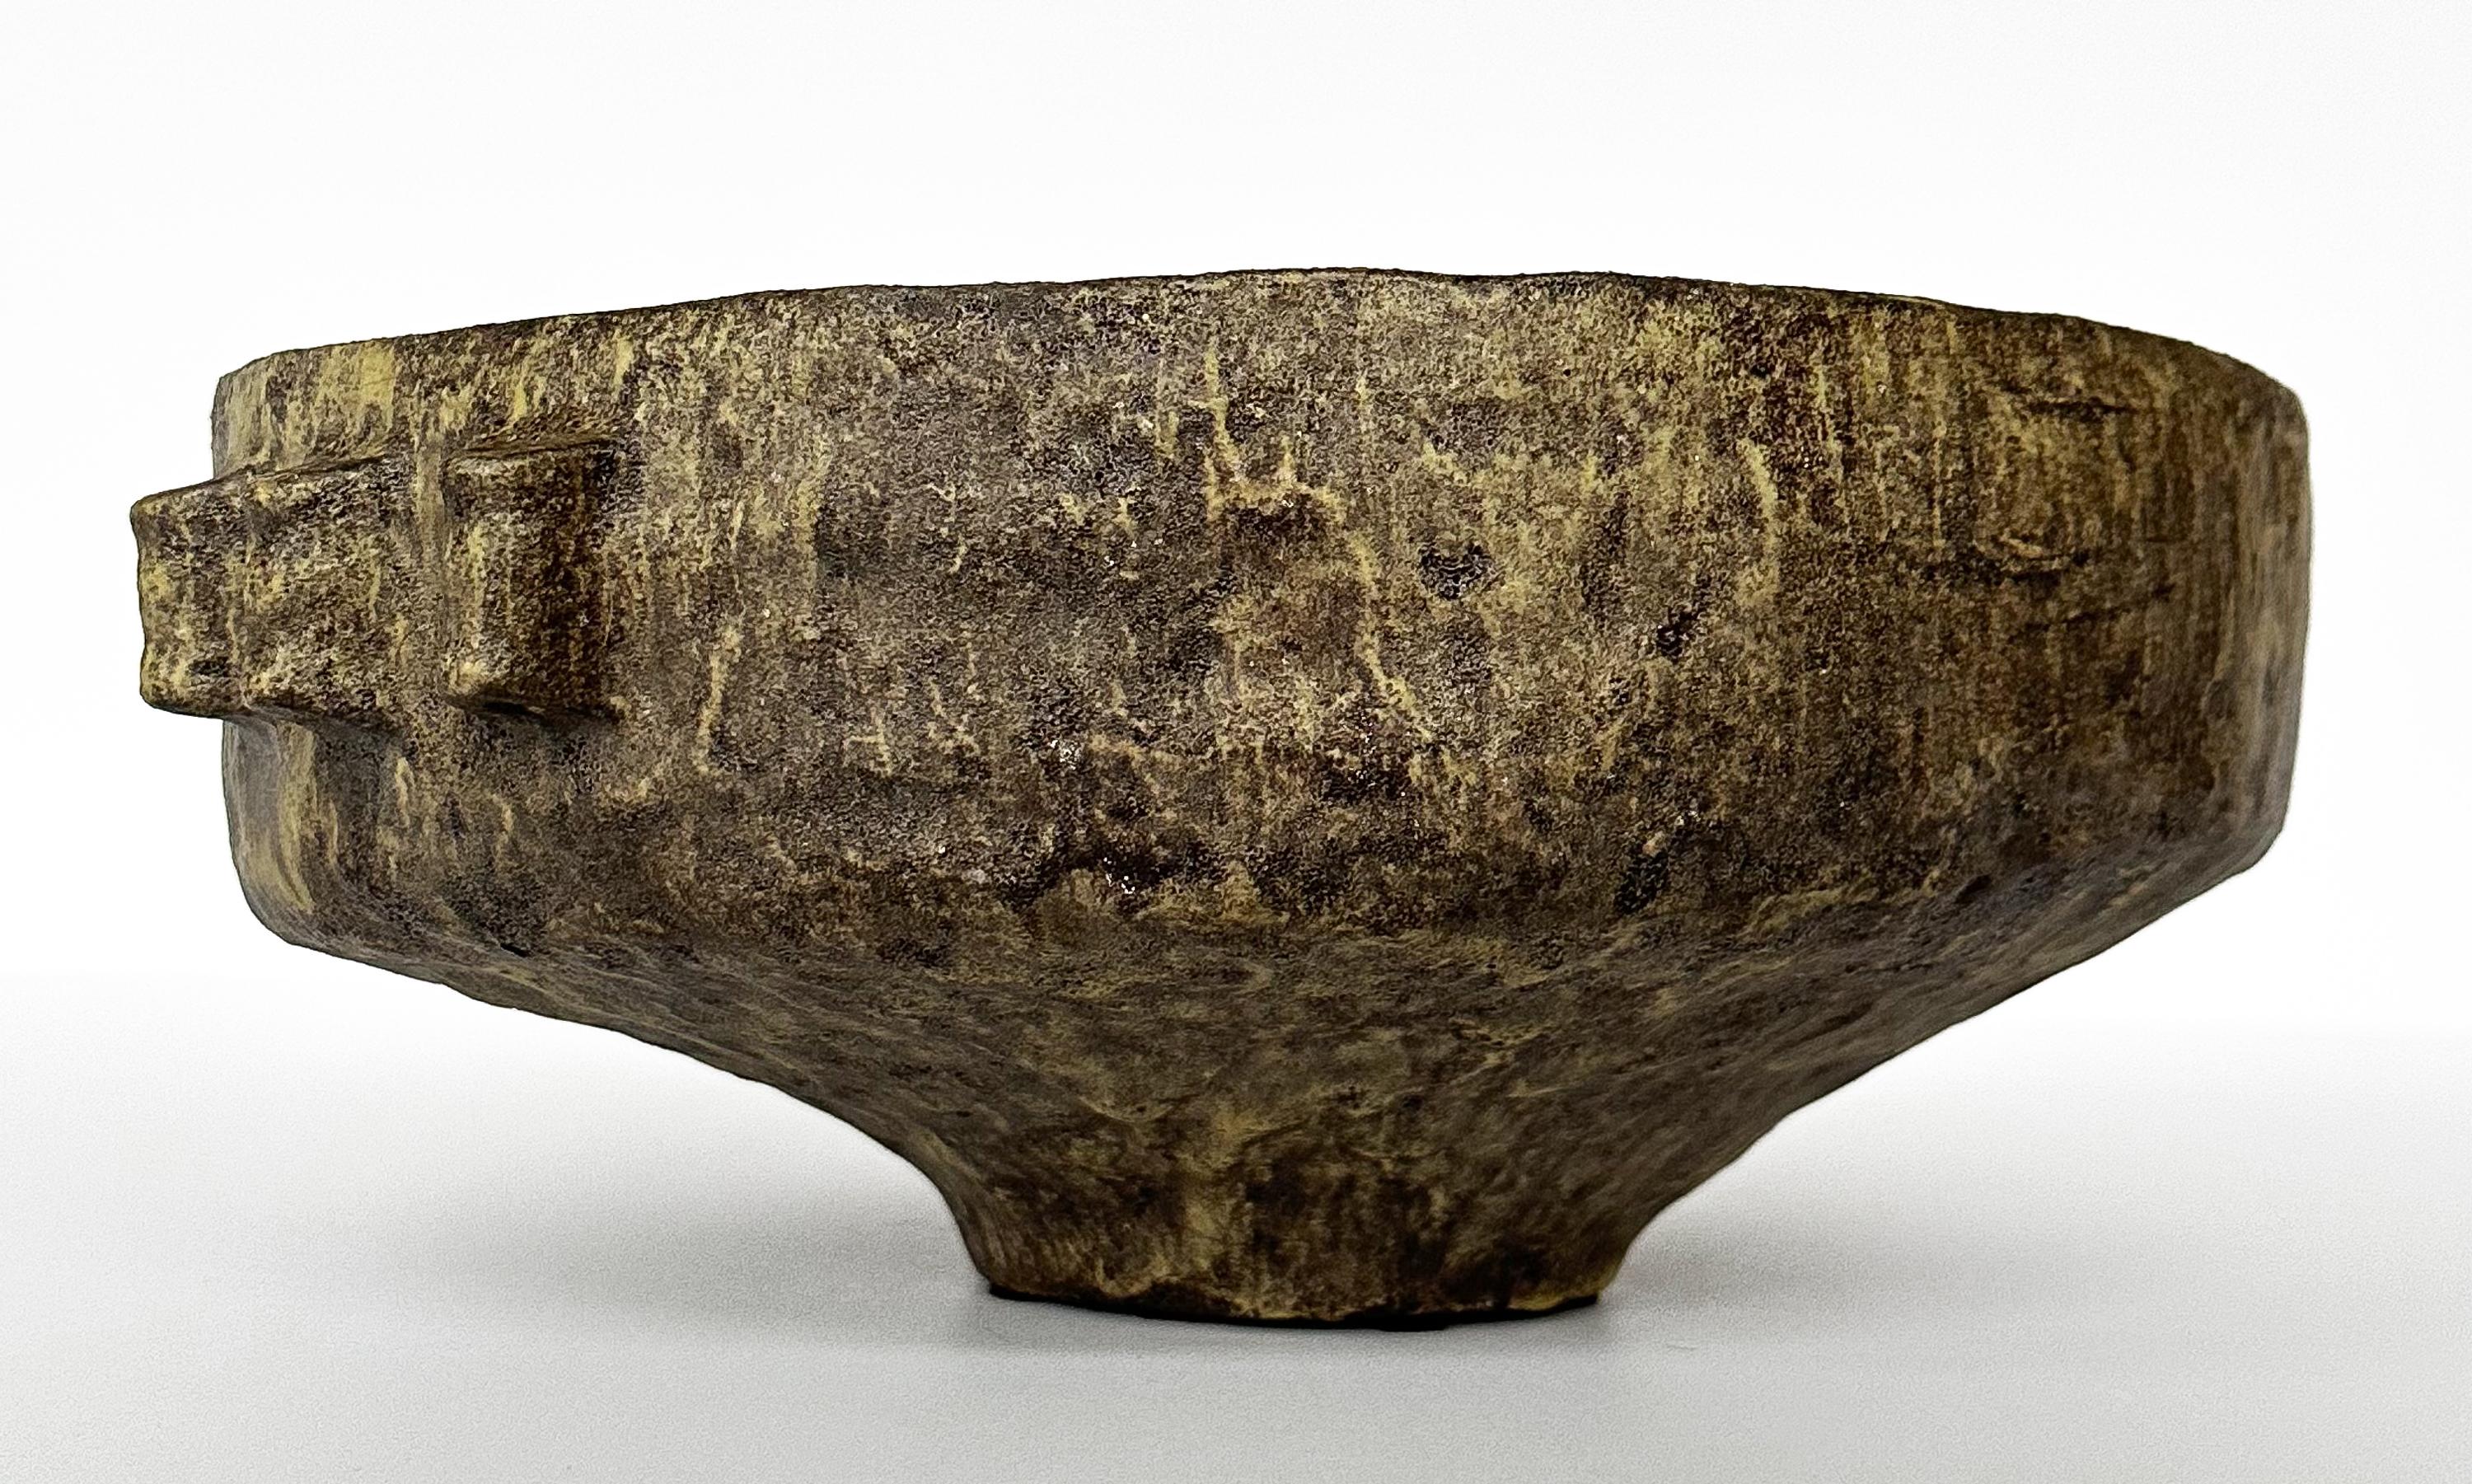 Marcello Fantoni (1915 - 2011) large ceramic centerpiece bowl, circa 1950s. A rare and uncommon design. This work draws direct inspiration from ancient Etruscan pottery which Fantoni's pieces were often influenced by. The bowl is an irregular